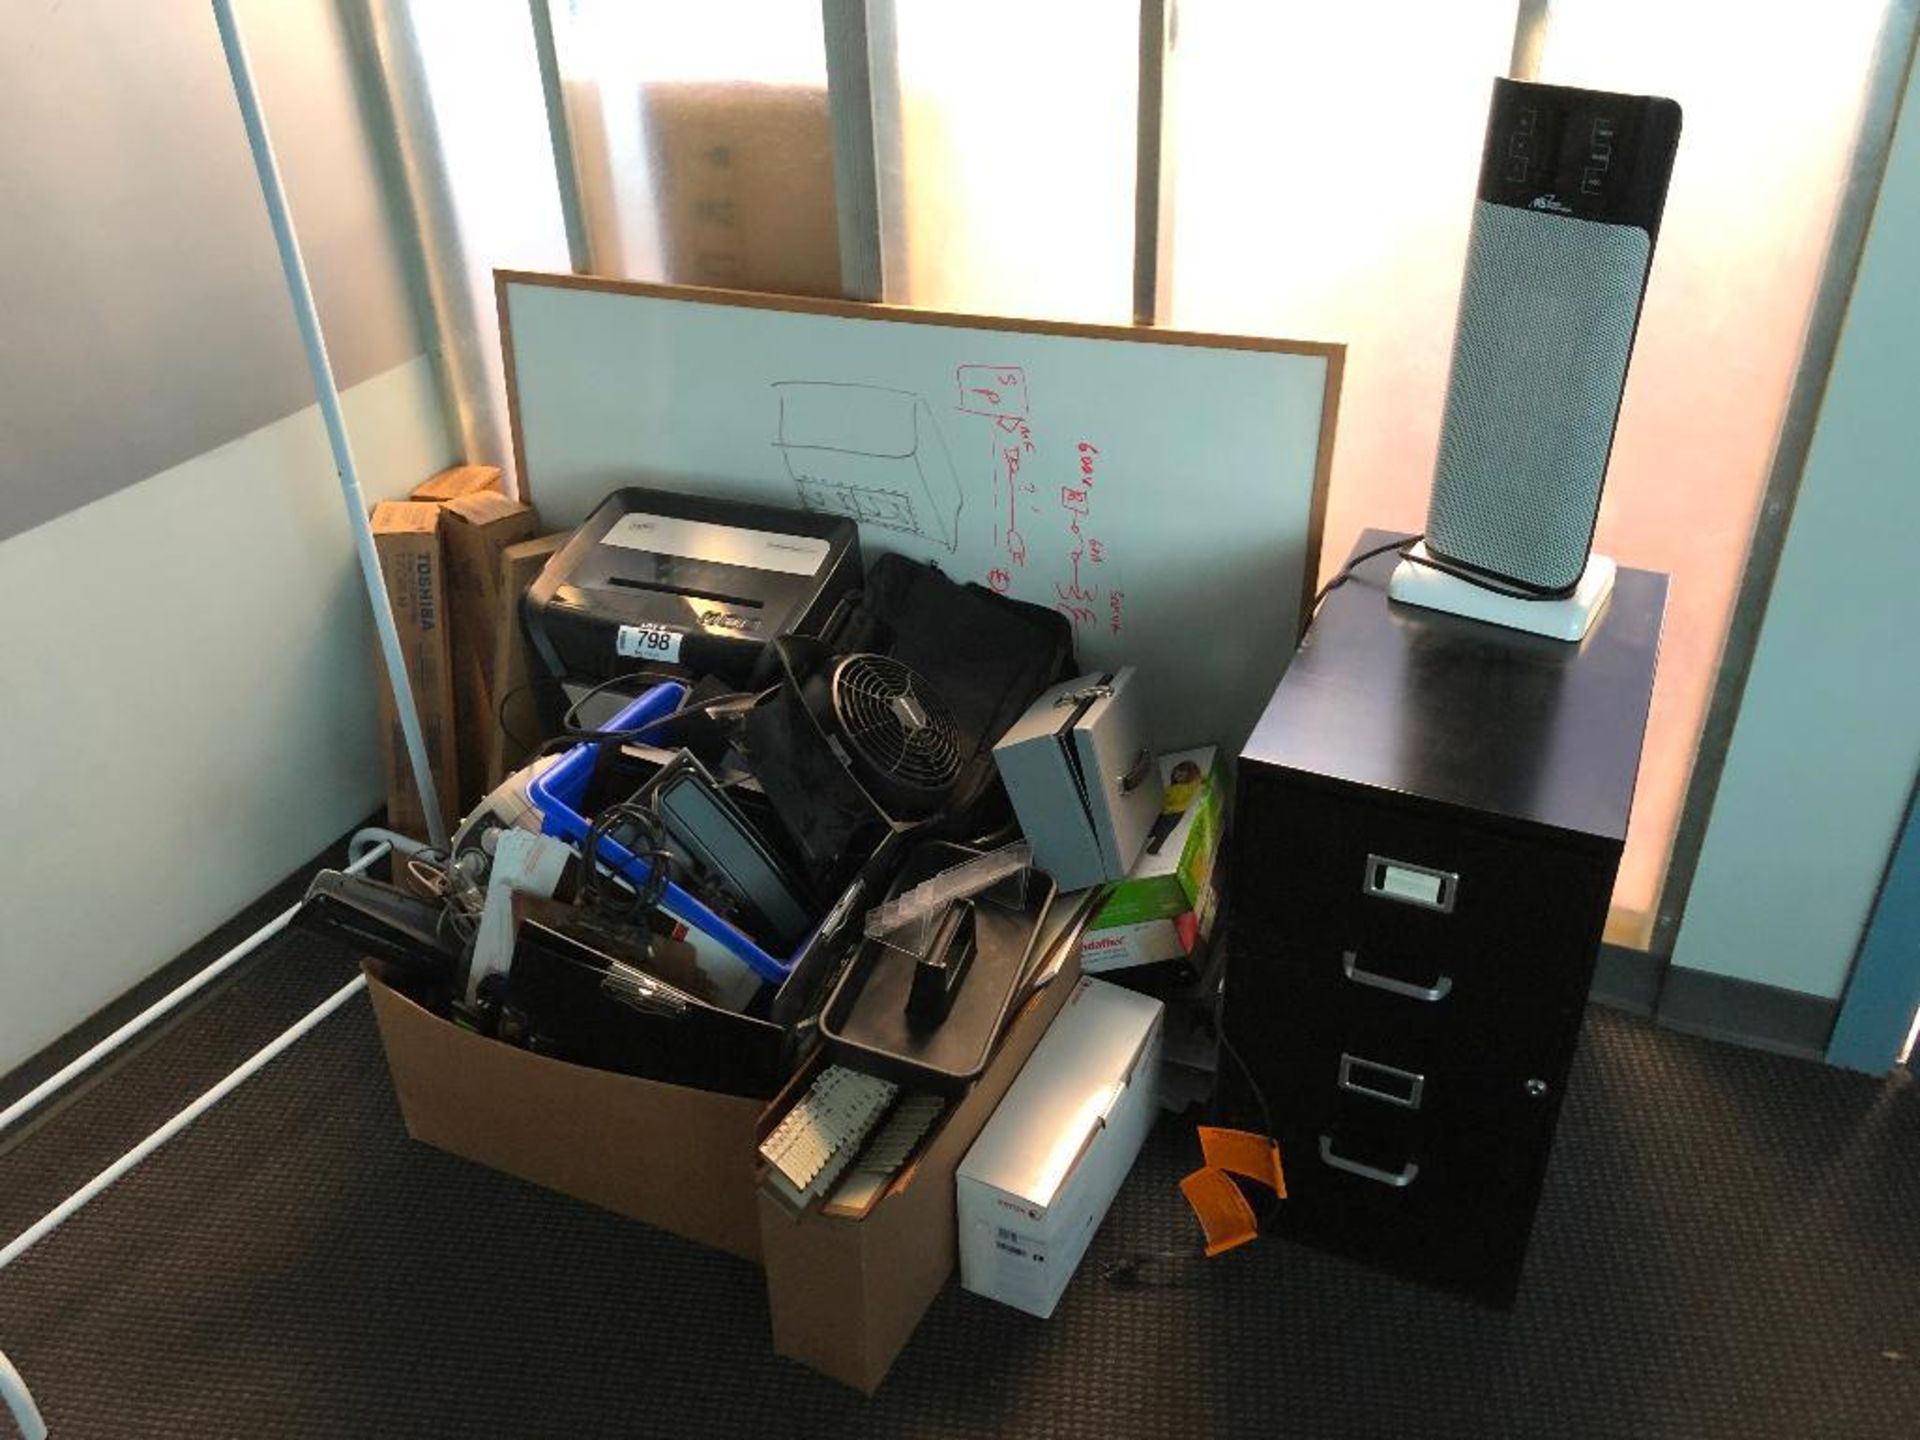 Lot of Paper Shredder, 2-Drawer Vertical Filing Cabinet, Space Heater, Fan, Office Supplies, etc. - Image 2 of 3